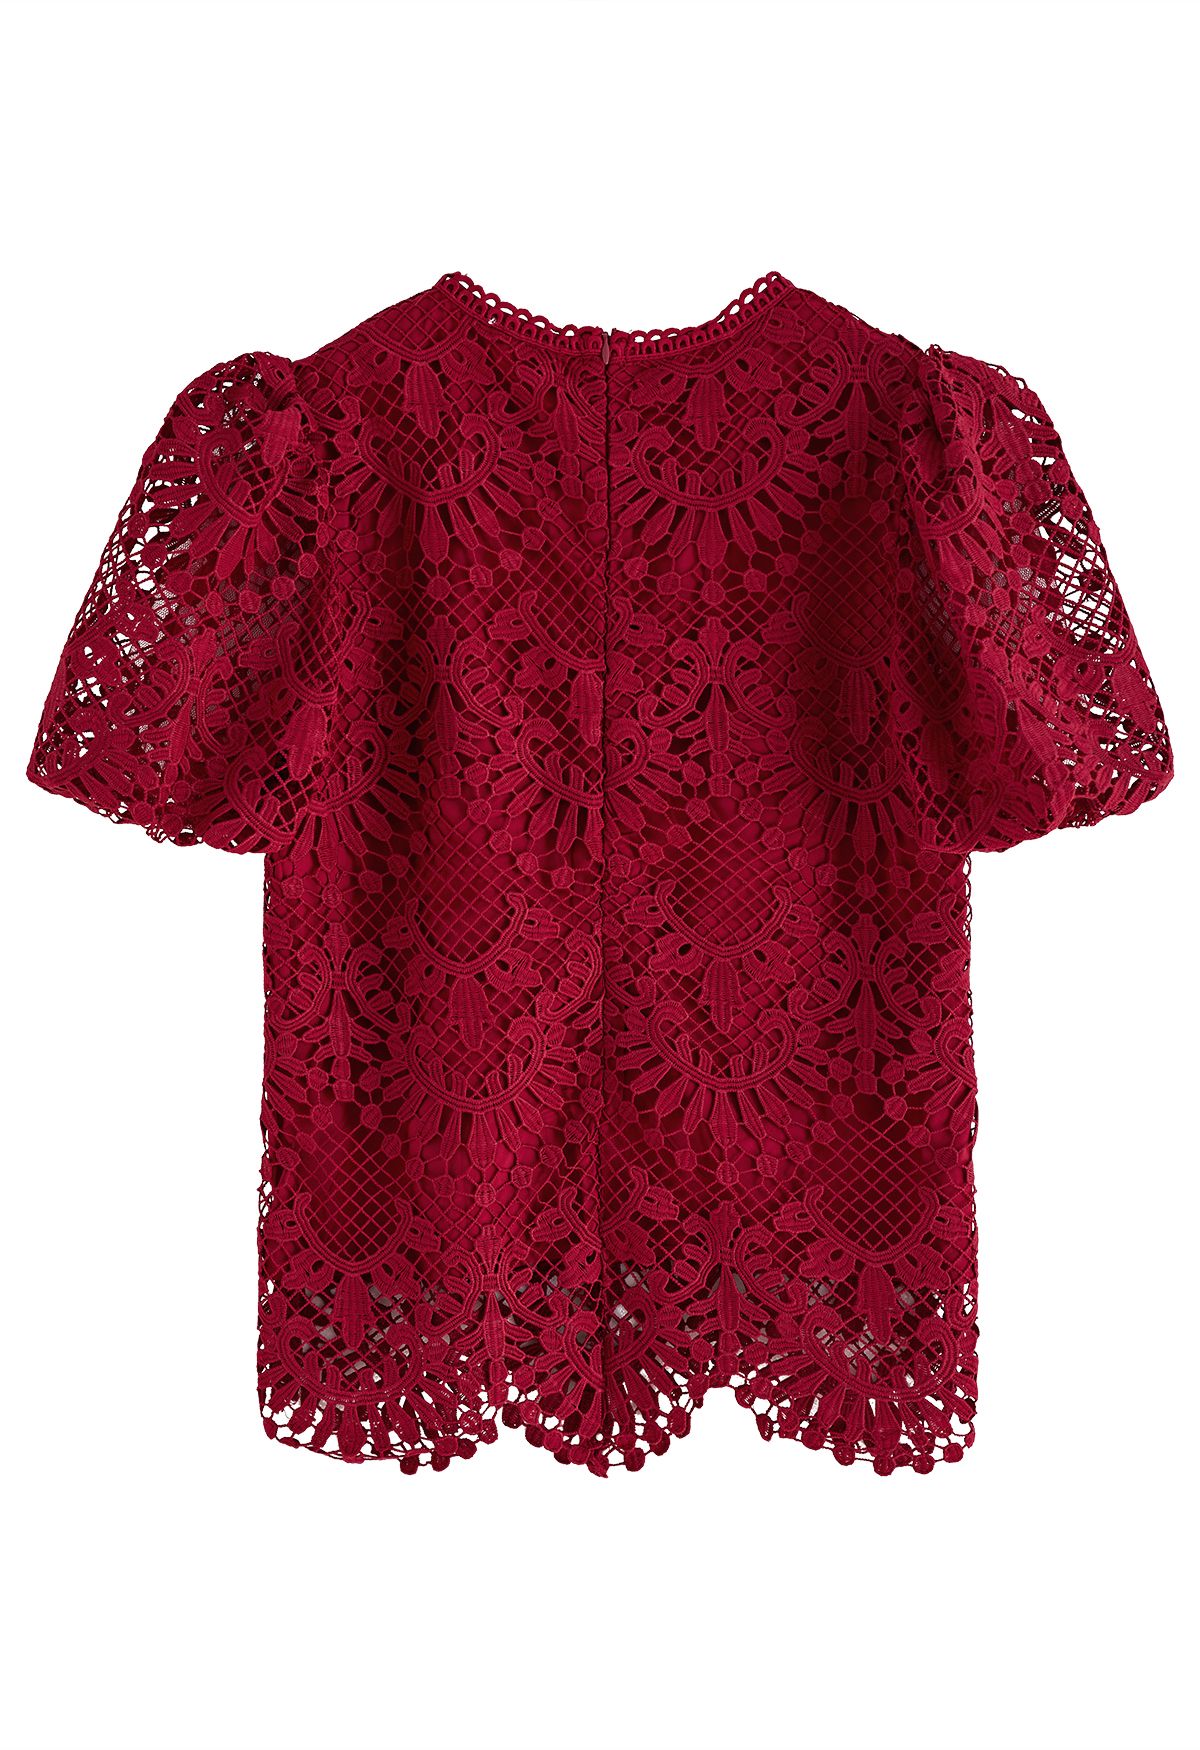 Scallop Edge Bubble Sleeve Crochet Top in Red